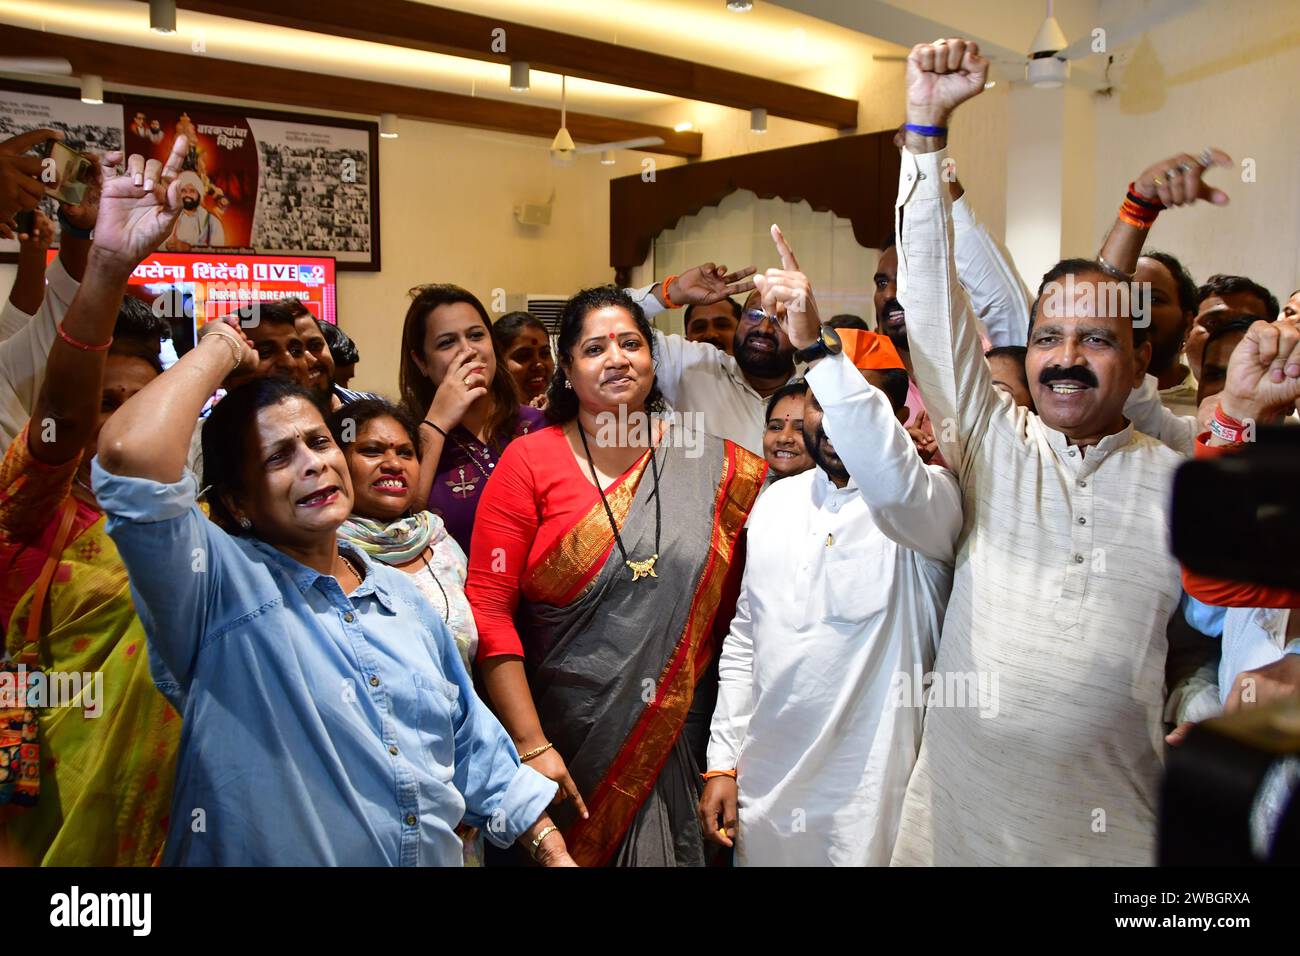 MUMBAI, INDIA - JANUARY 10: Shiv Sena (Shinde faction) workers celebrate after the verdict in the MLA disqualification case came in the favour, at Balasaheb Bhavan on January 10, 2024 in Mumbai, India. The Maharashtra Legislative Assembly Speaker Rahul Narwekar today held that Eknath Shinde led faction was the real Shiv Sena when the rival faction emerged within the party on June 22, 2022. He has refused to disqualify any member from both the factions, led by Shinde and Uddhav Thackeray. Both the factions had filed 34 petitions against each other before the speaker in 2022, seeking the disqu Stock Photo